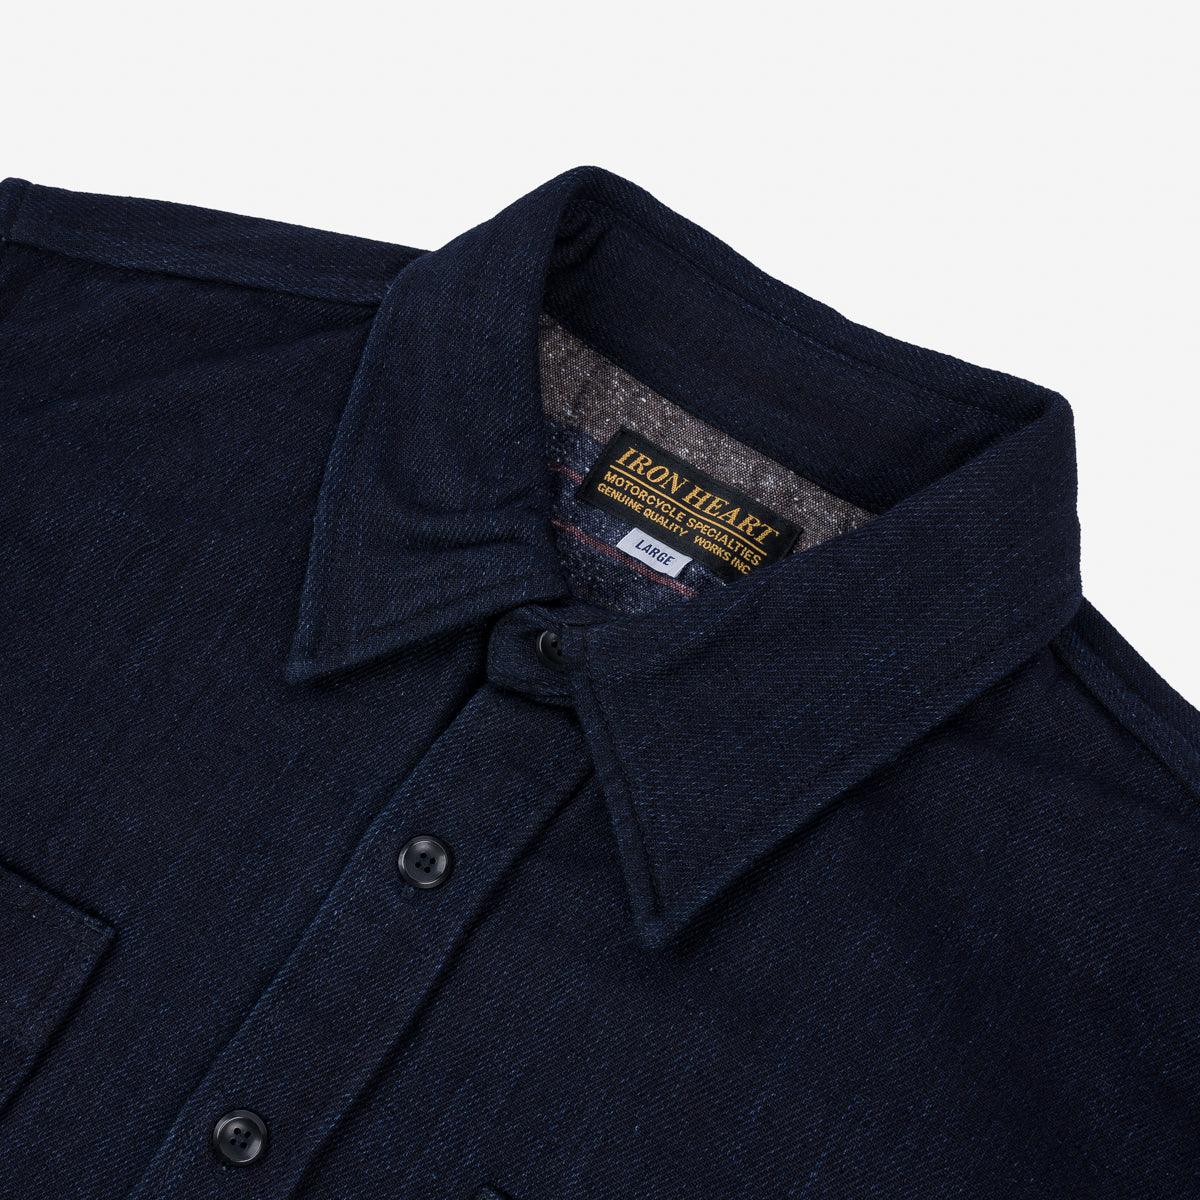 Iron Heart IHSH-374-IND 14oz Double Cloth Work Shirt - Indigo - Guilty Party